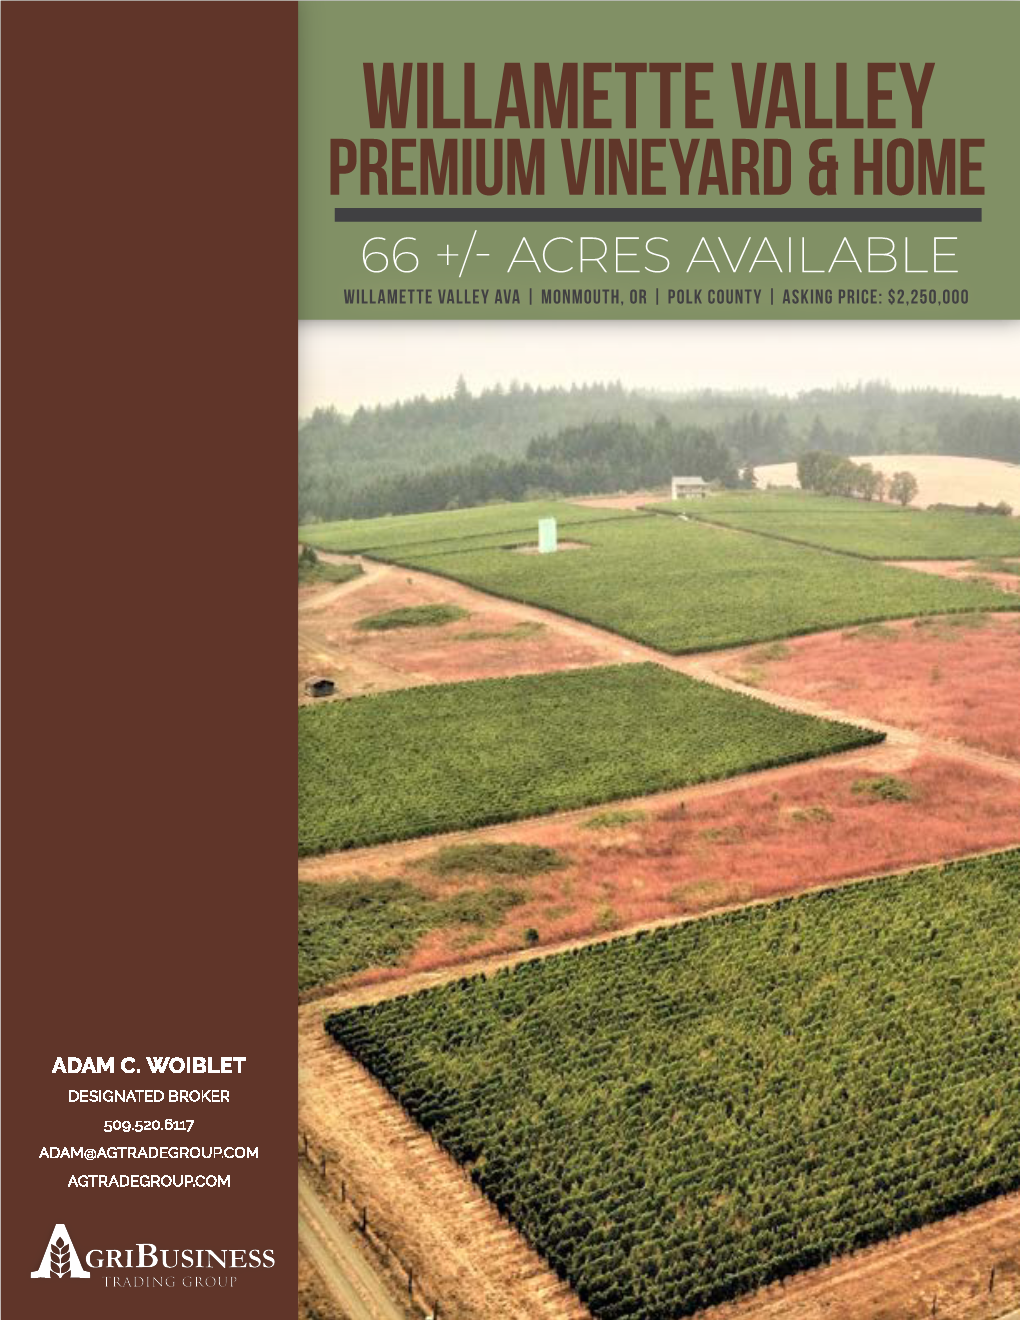 Willamette Valley Premium Vineyard & Home 66 +/- Acres Available Willamette Valley Ava | Monmouth, Or | Polk County | Asking Price: $2,250,000